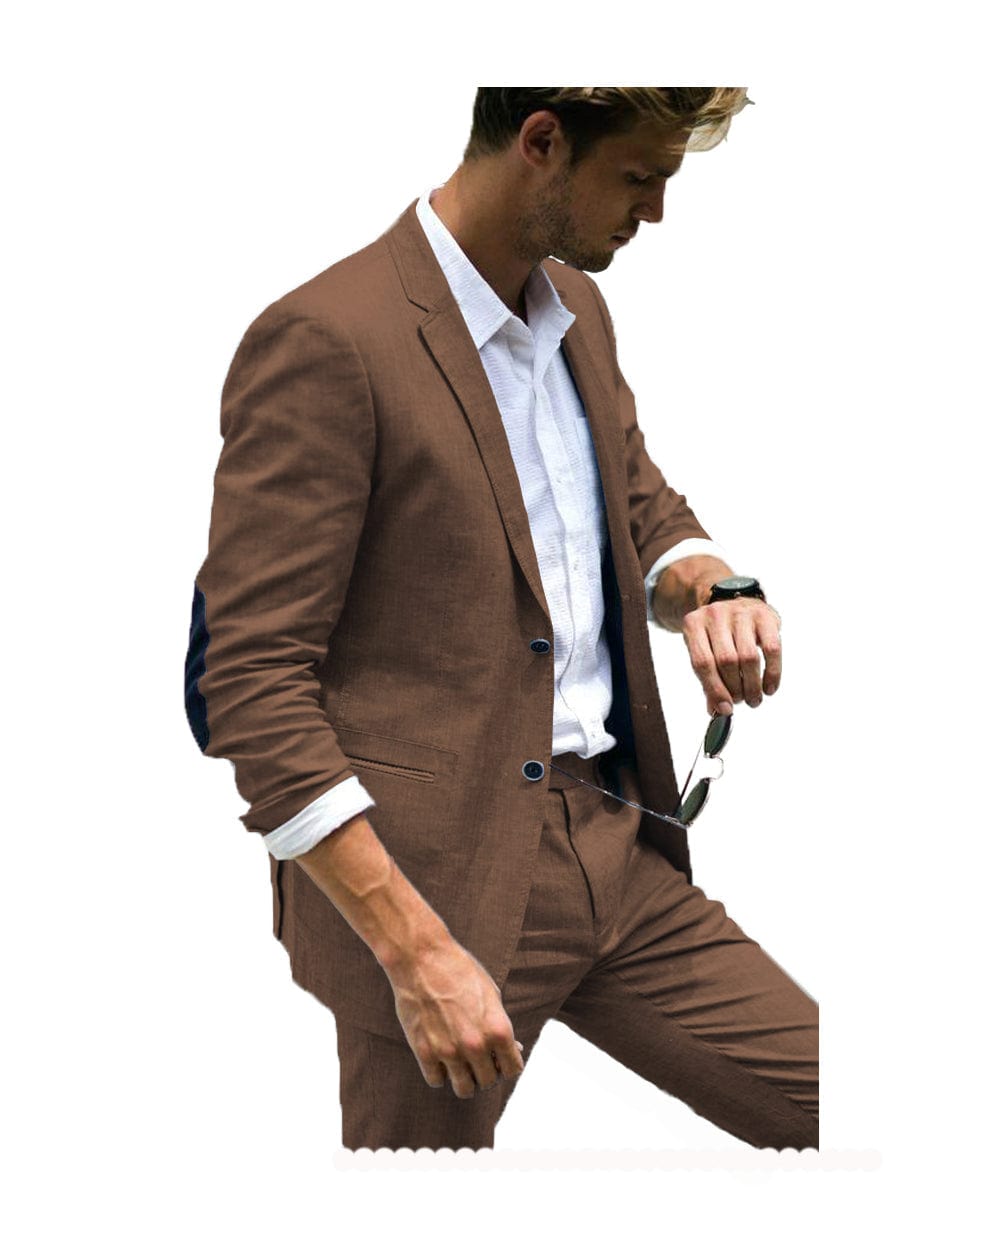 A Suit Jacket with Sweatpants? This Saks Jacket Says It's OK - Men's Journal